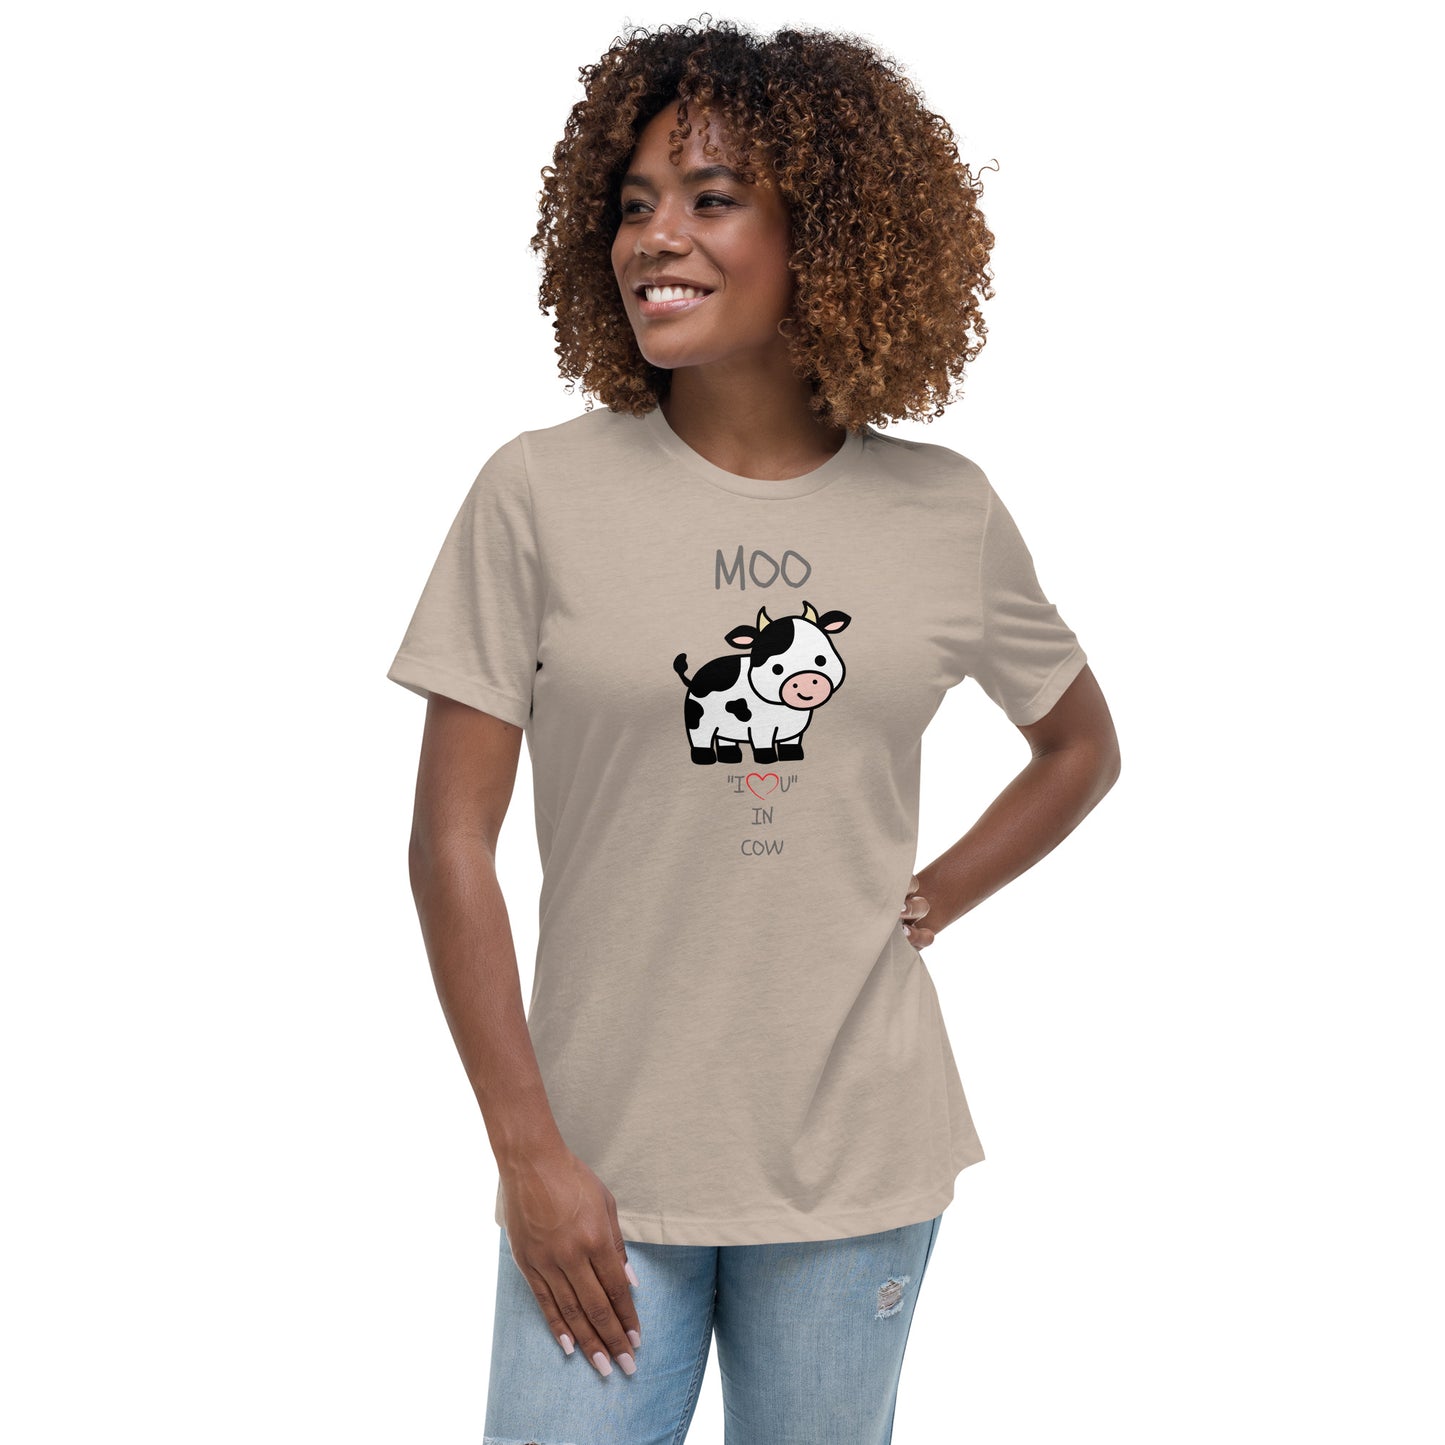 MOO "I LOVE YOU" IN COW Women's Relaxed T-Shirt